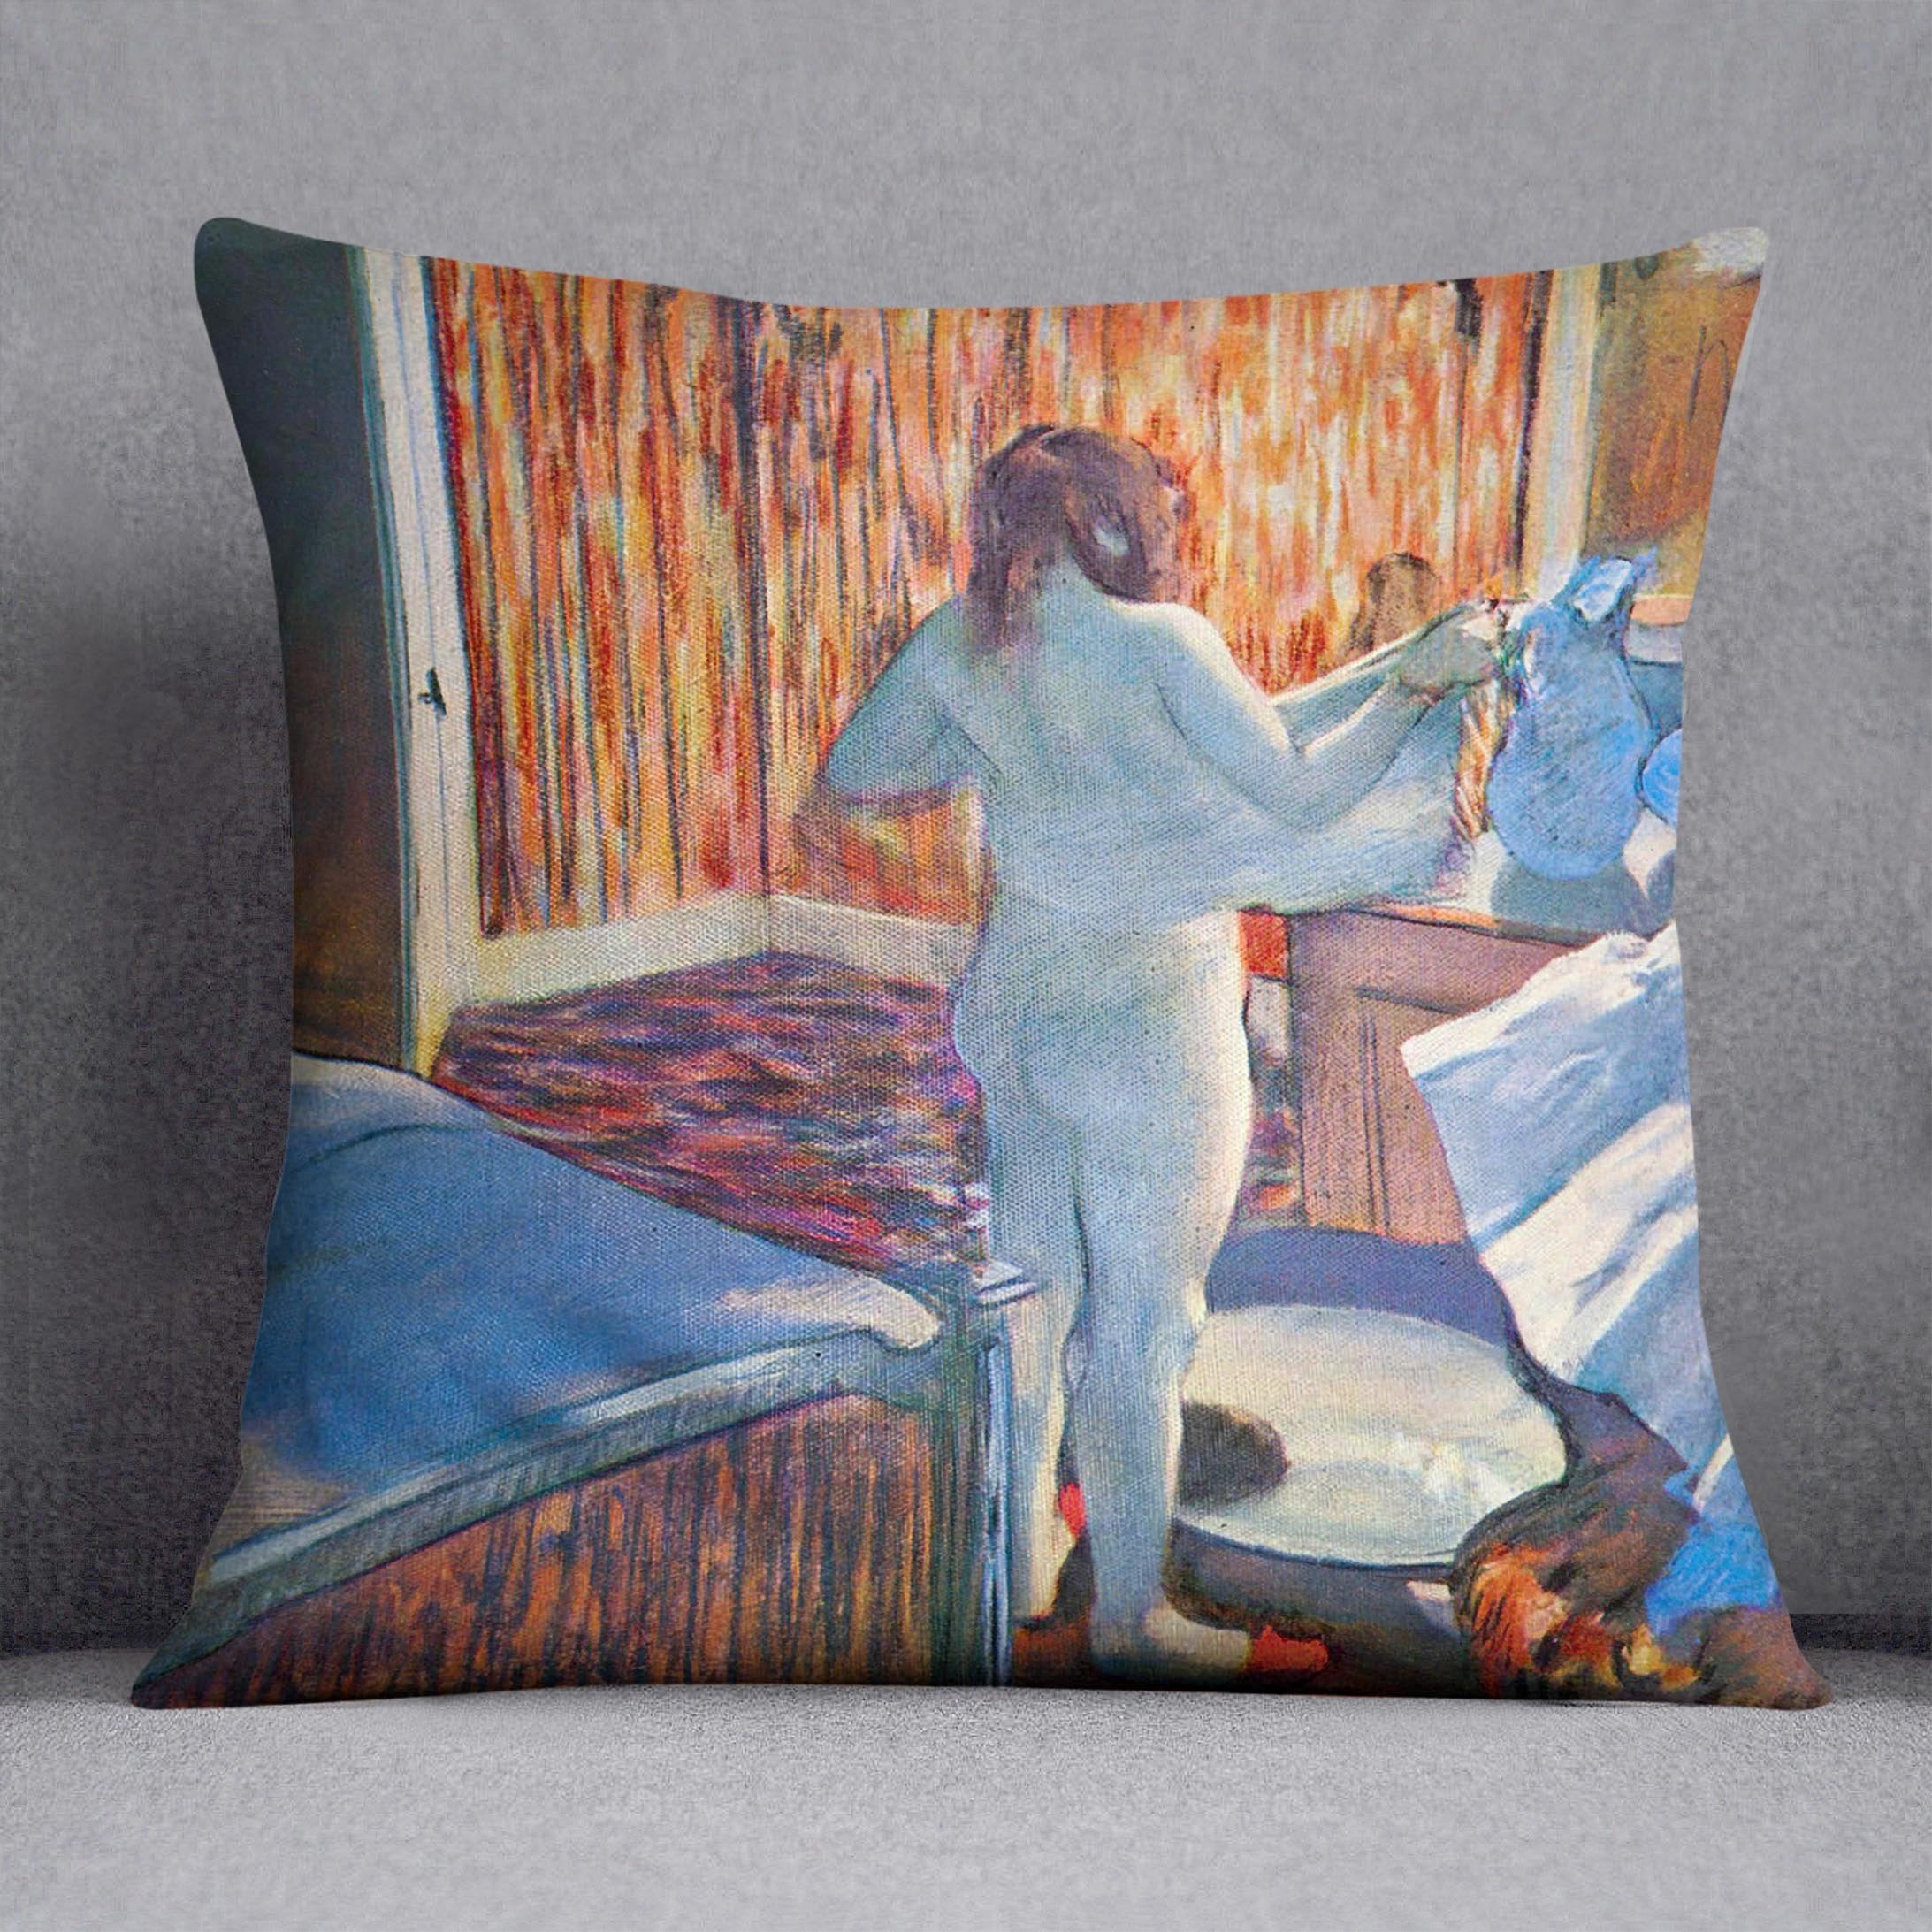 Women at the toilet 3 by Degas Cushion